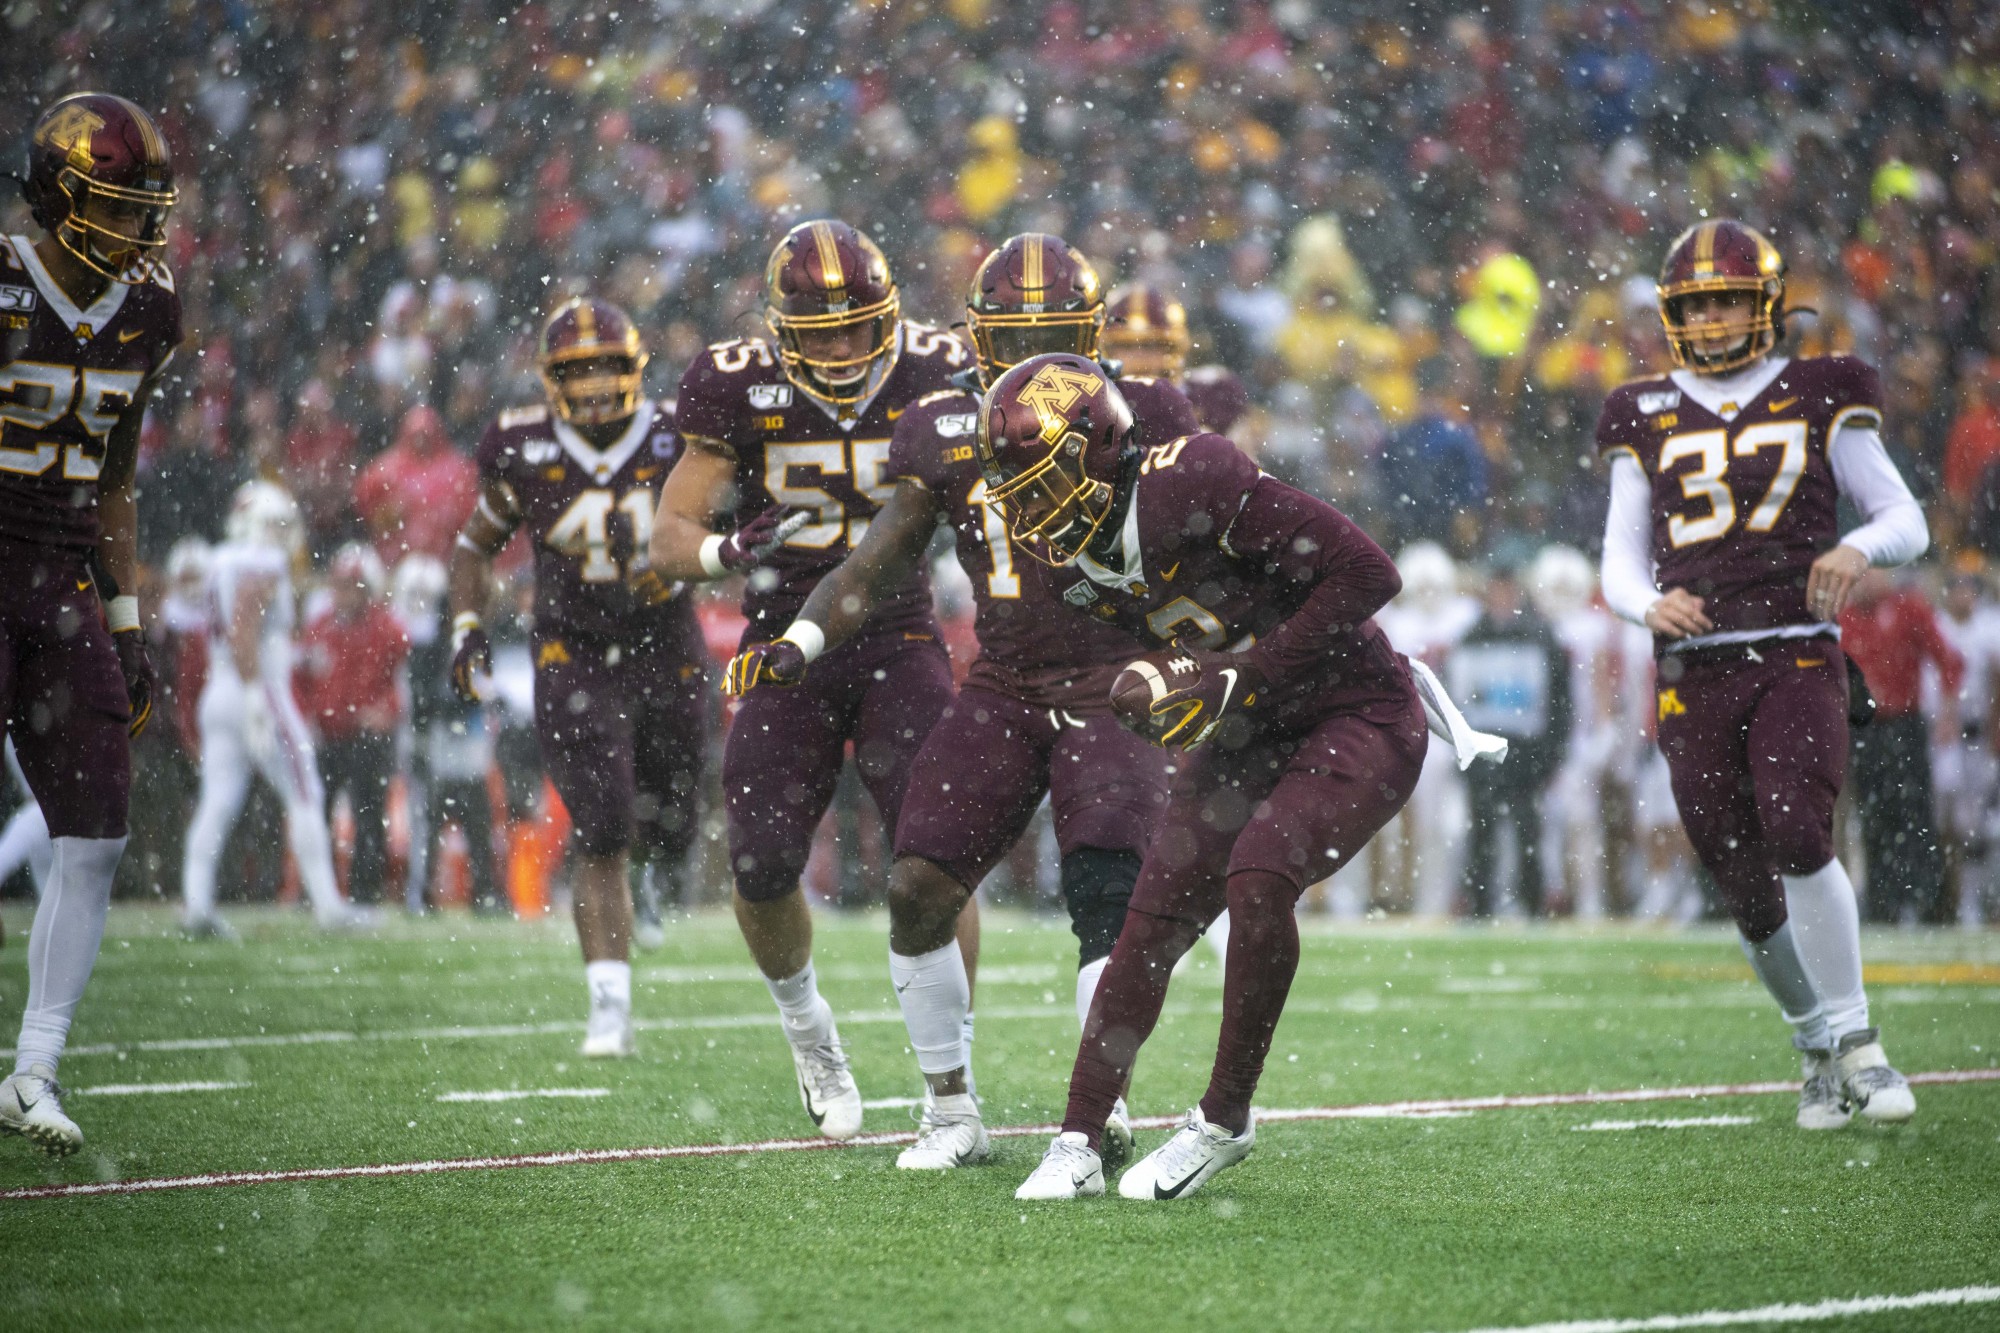 Defensive back Phillip Howard catches the ball during the game against the Badgers at TCF Bank Stadium on Saturday, Nov. 30. 